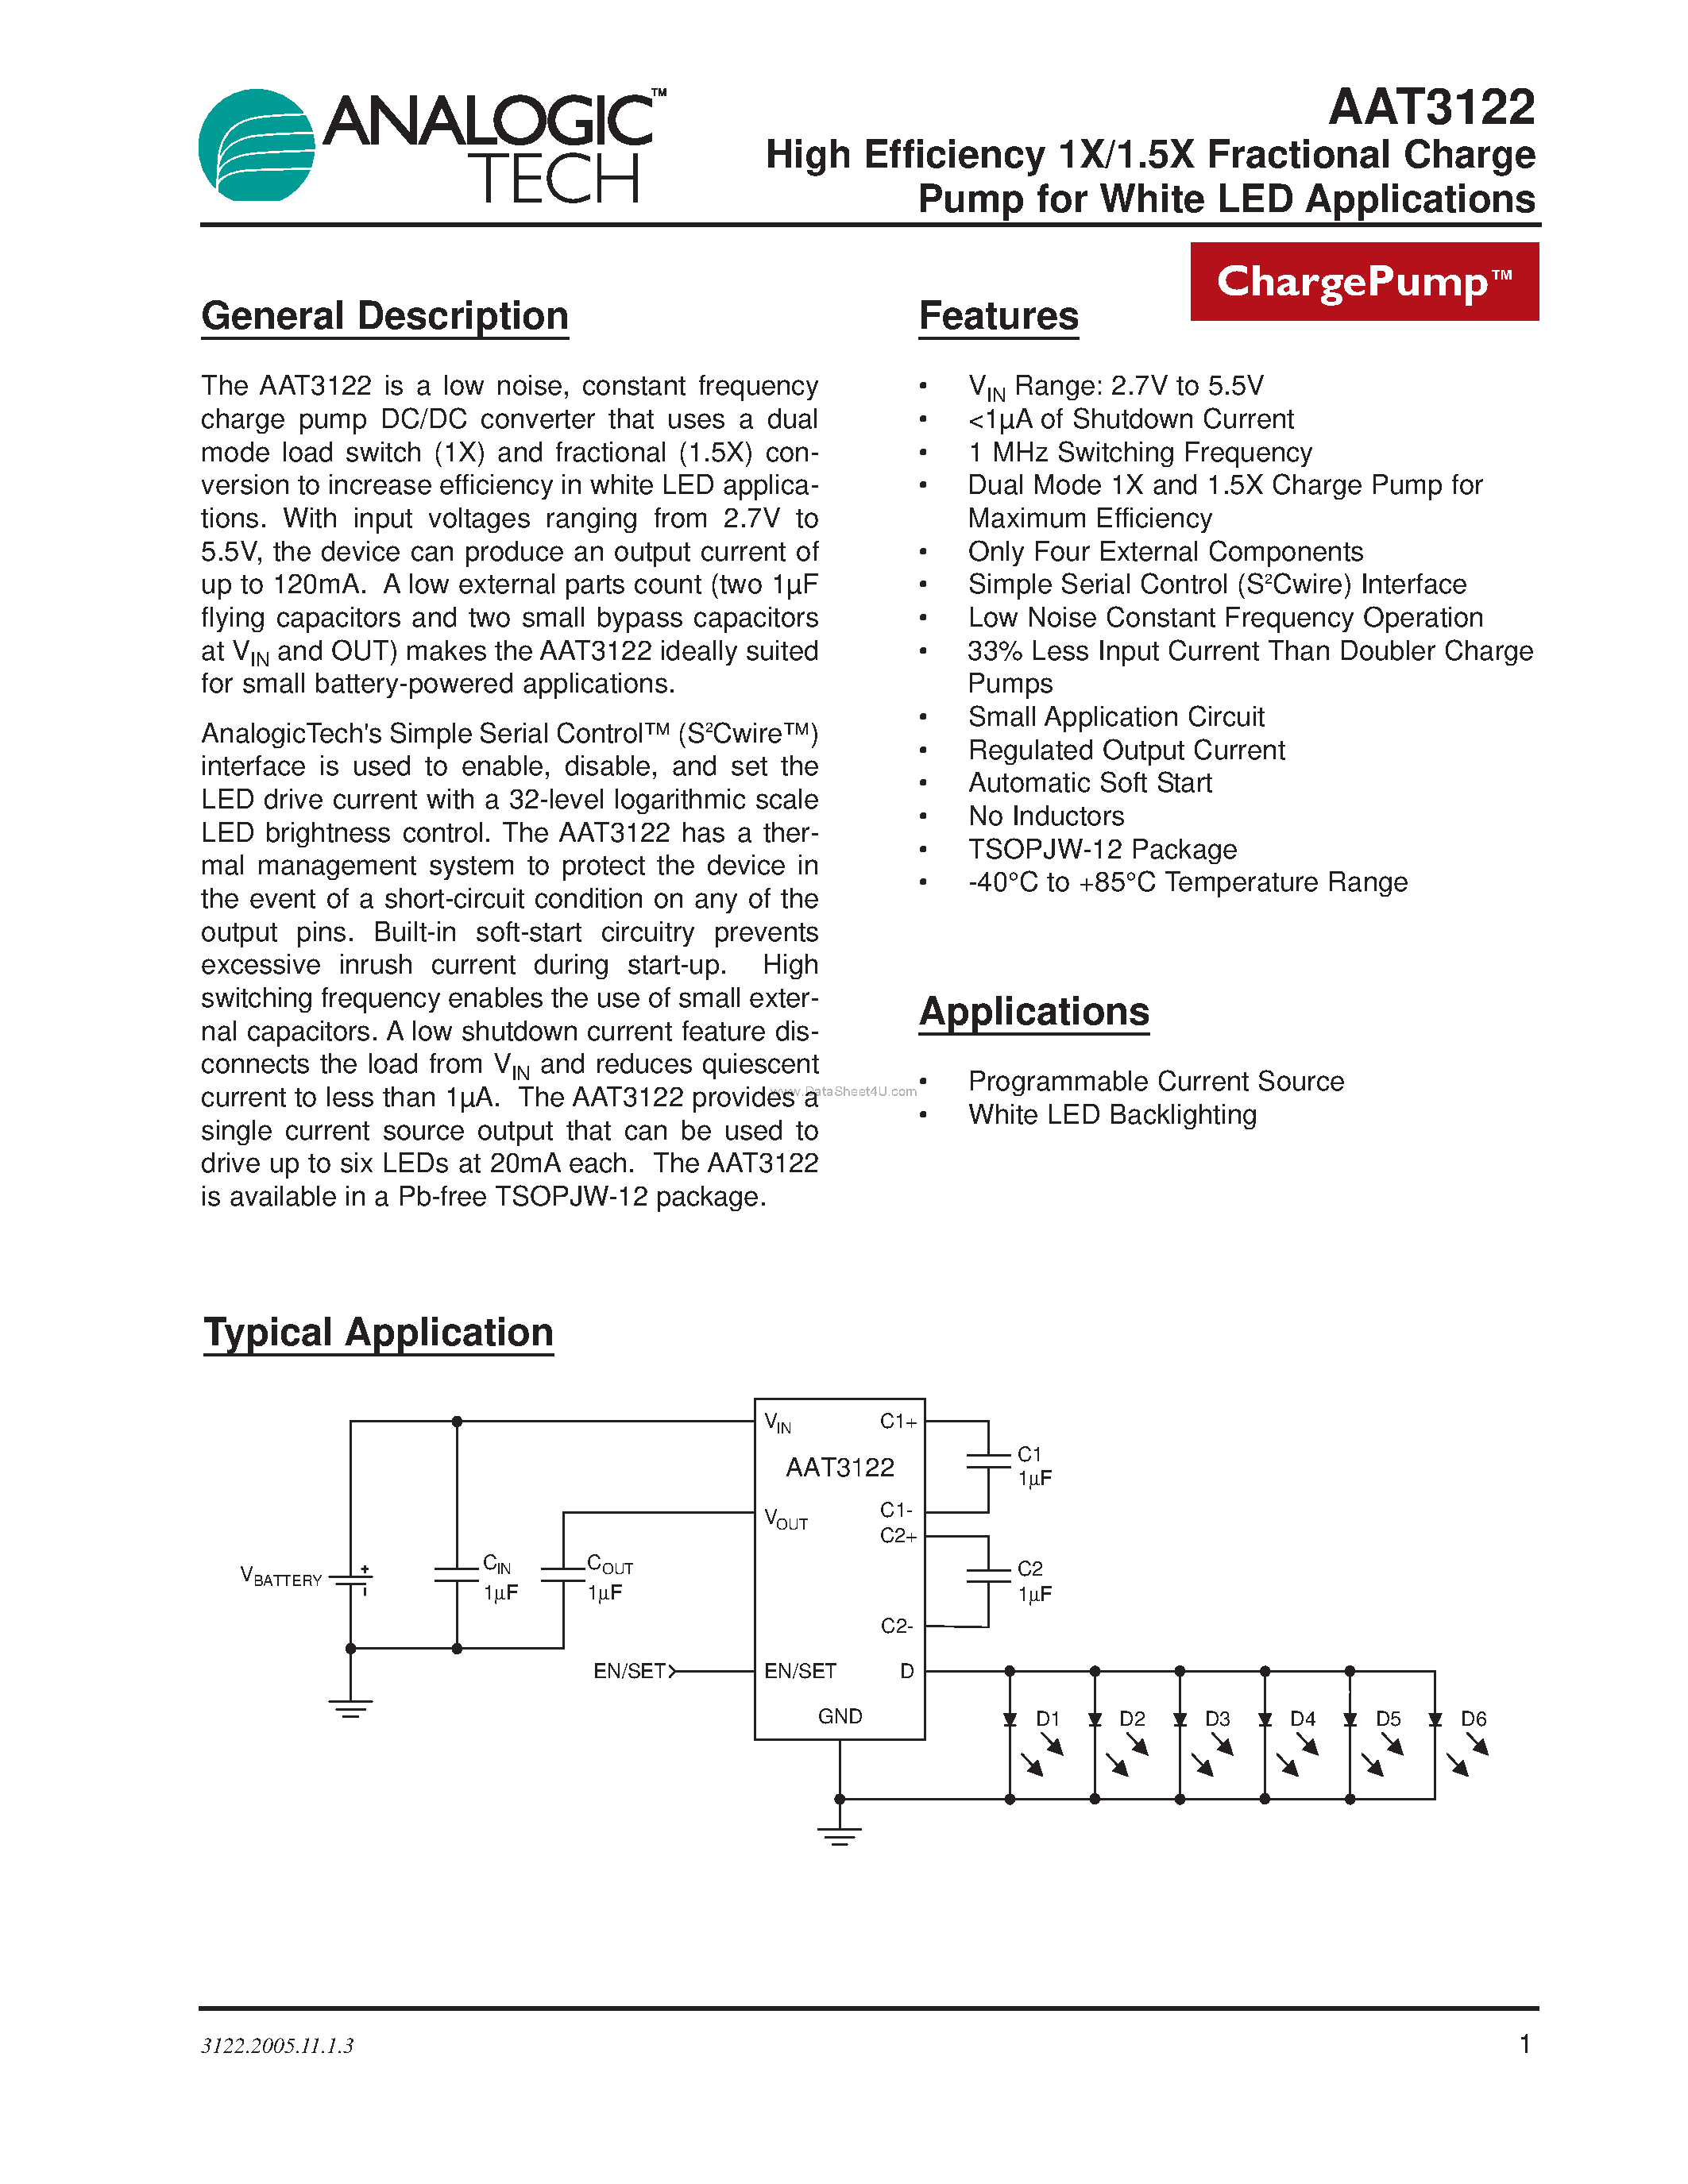 Datasheet AAT3122 - High Efficiency 1X/1.5X Fractional Charge Pump page 1